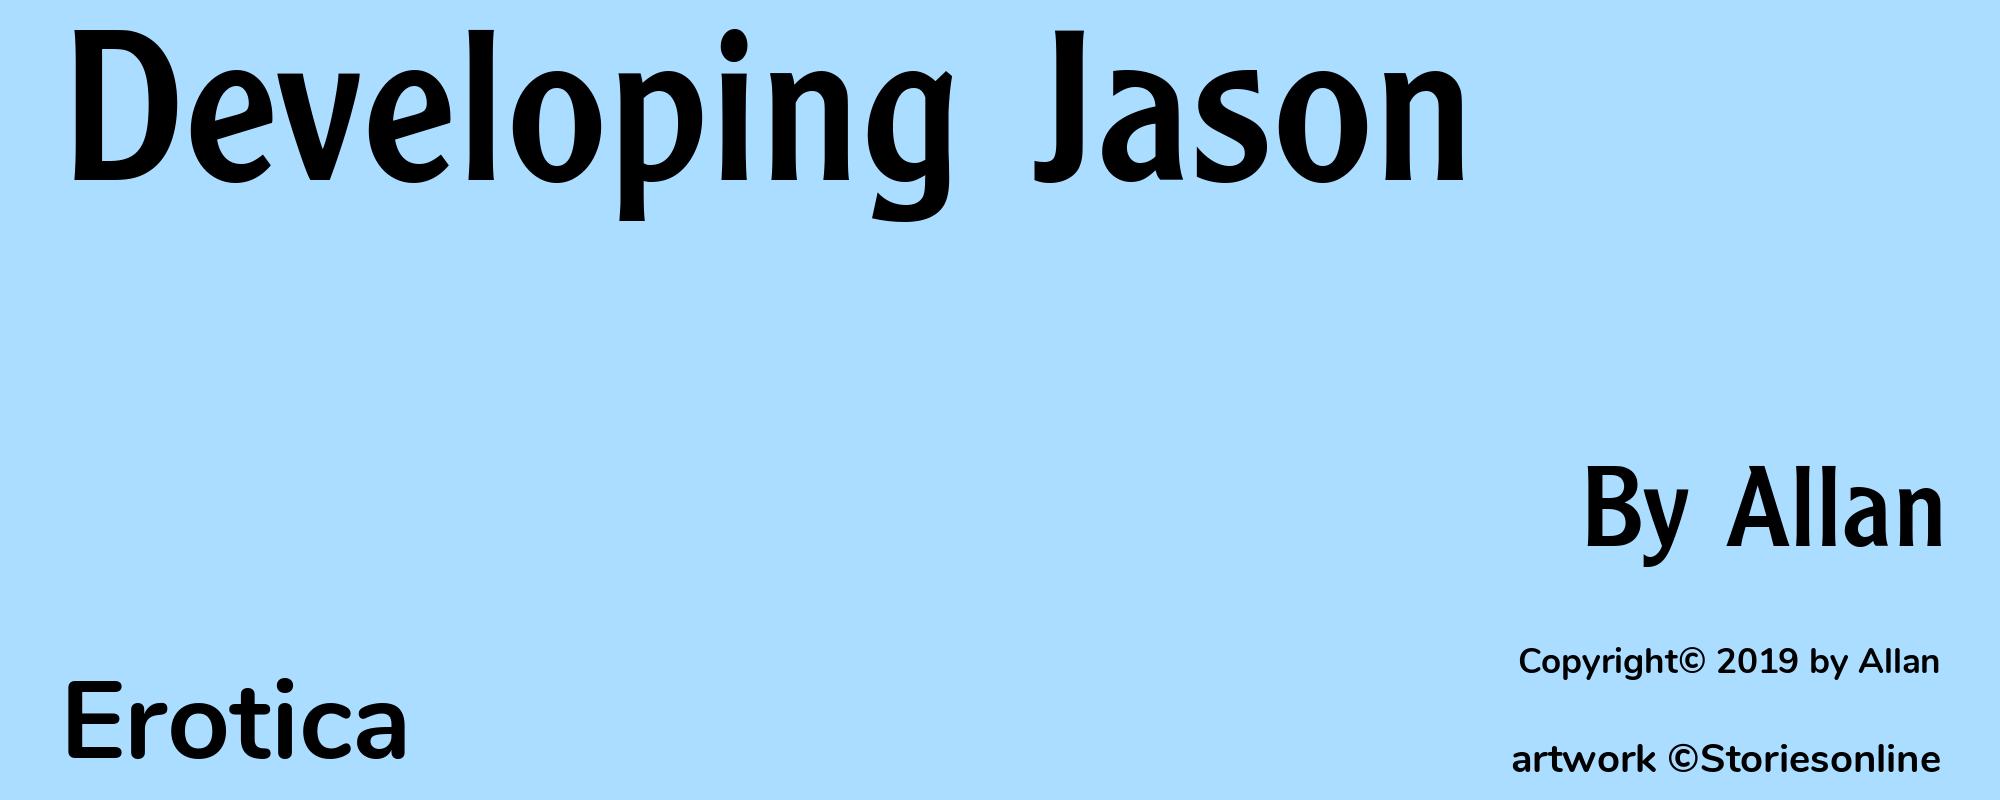 Developing Jason - Cover